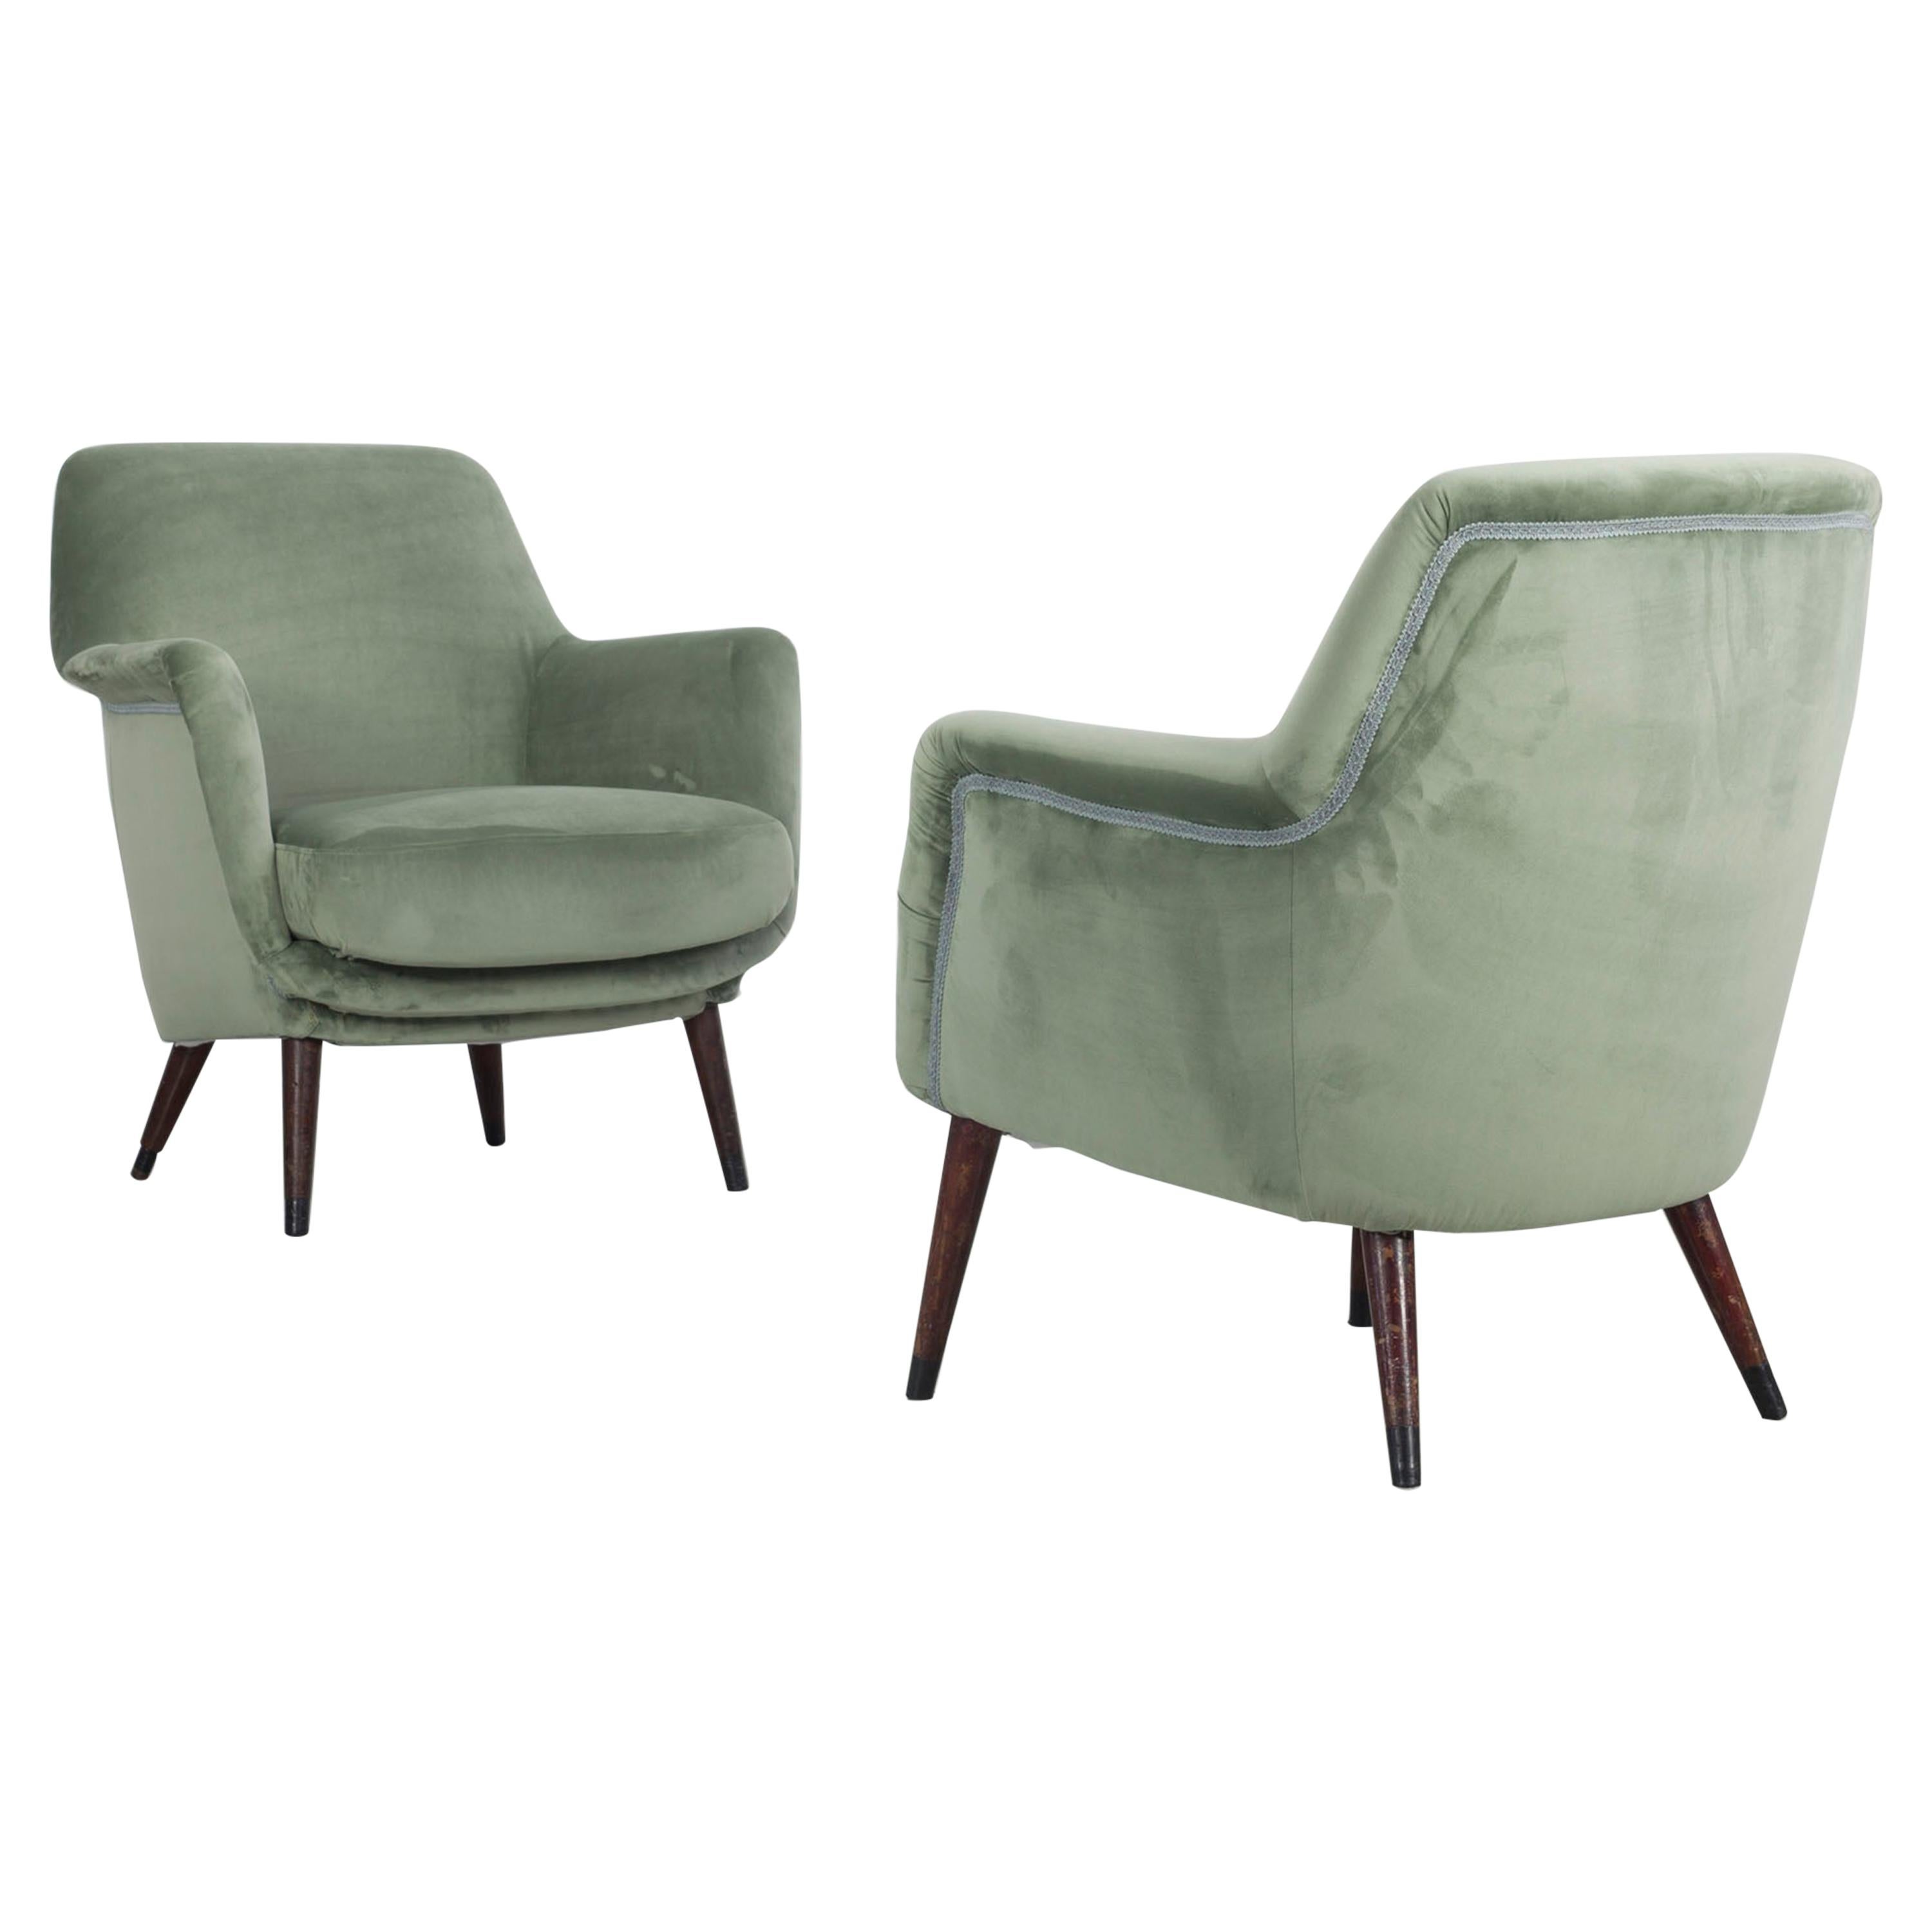 Set of 2 Zoncada Armchairs, Model "1101" and "1102" by Cassina from Italy, 1958